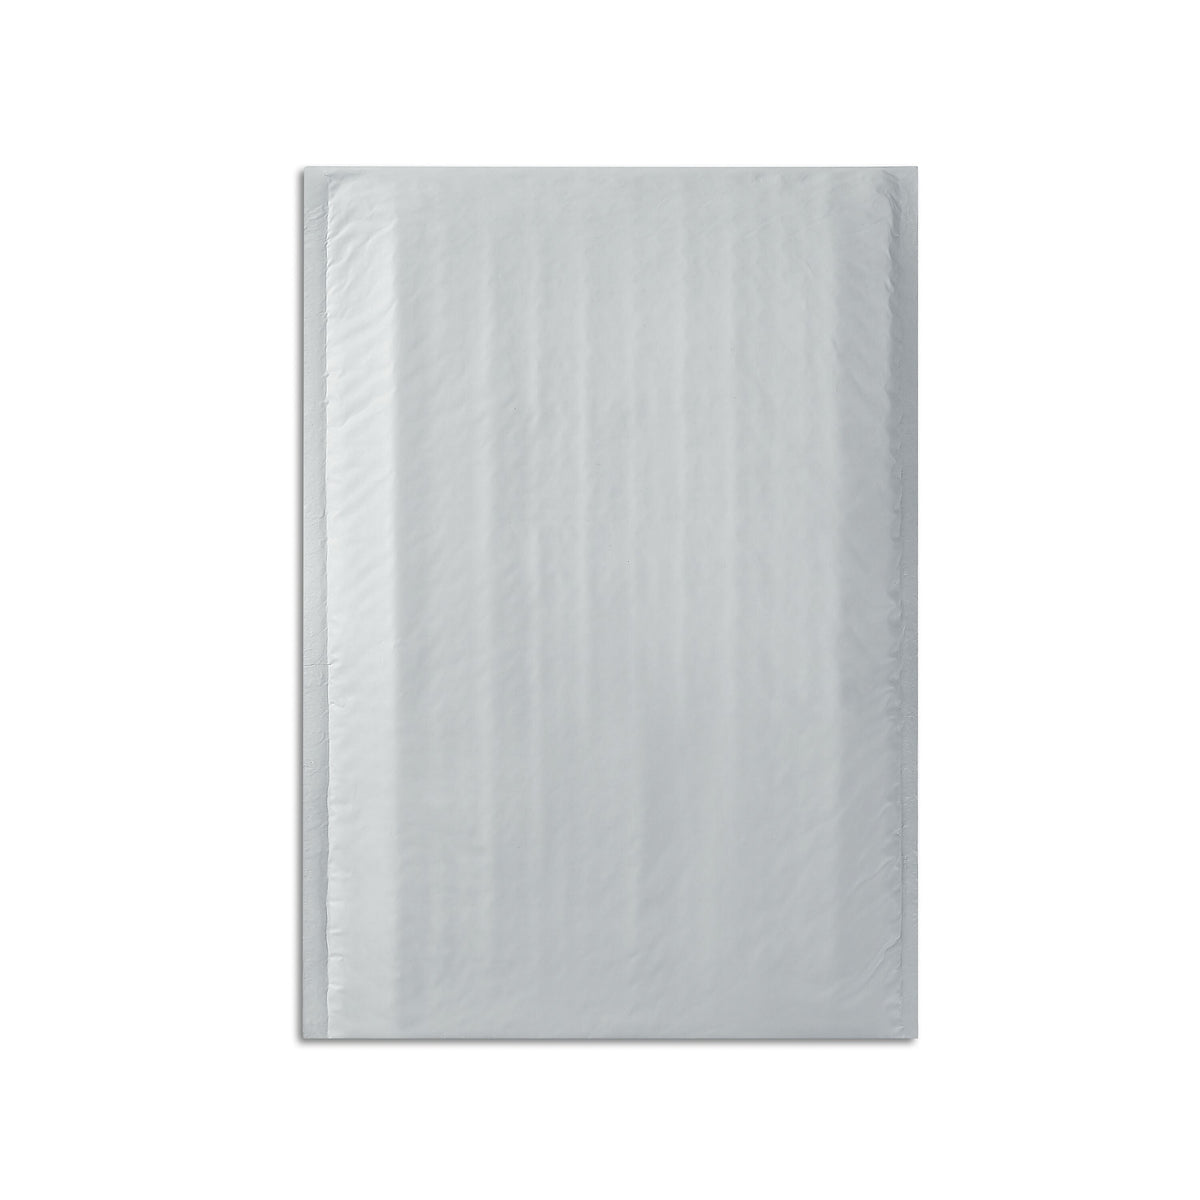 14.25"W x 19"L Peel & Seal Bubble Mailer, #7, 8/Pack